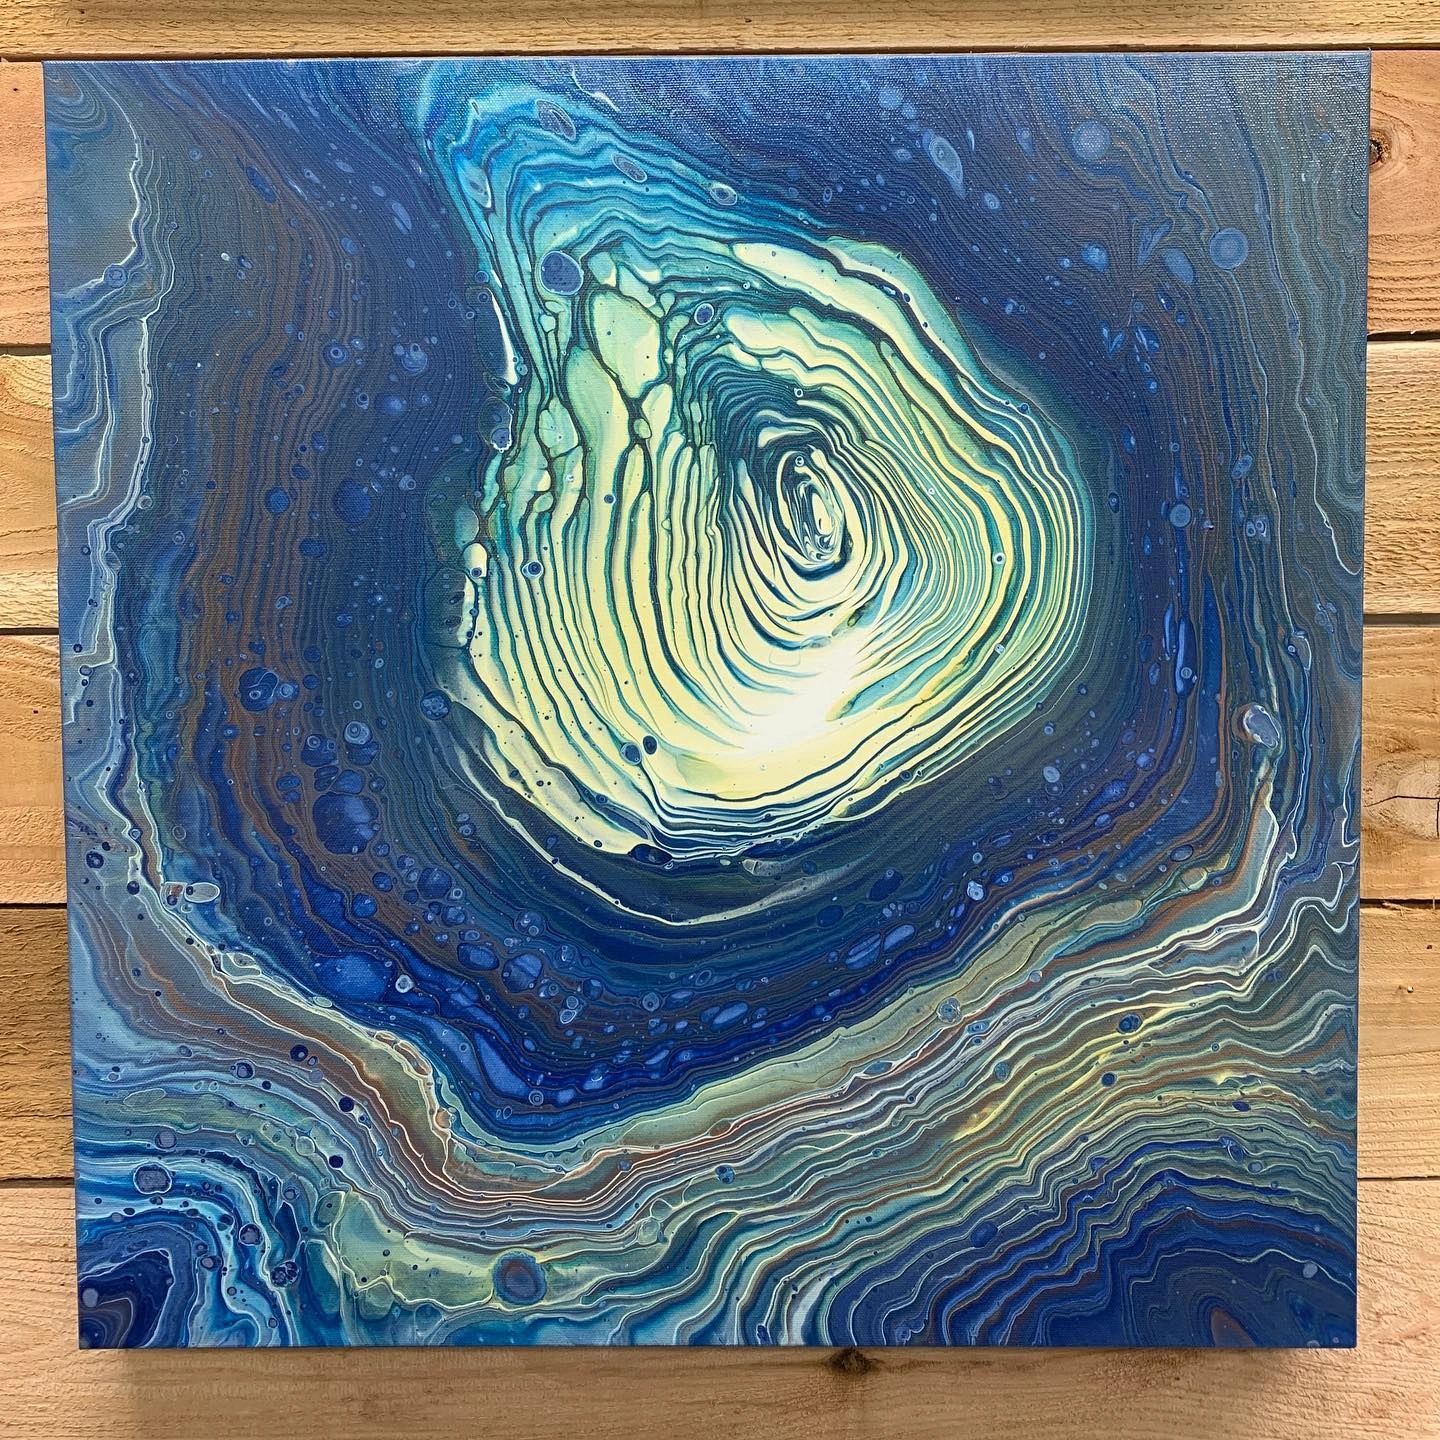 24x24x ring pour on a gallery wrapped canvas.